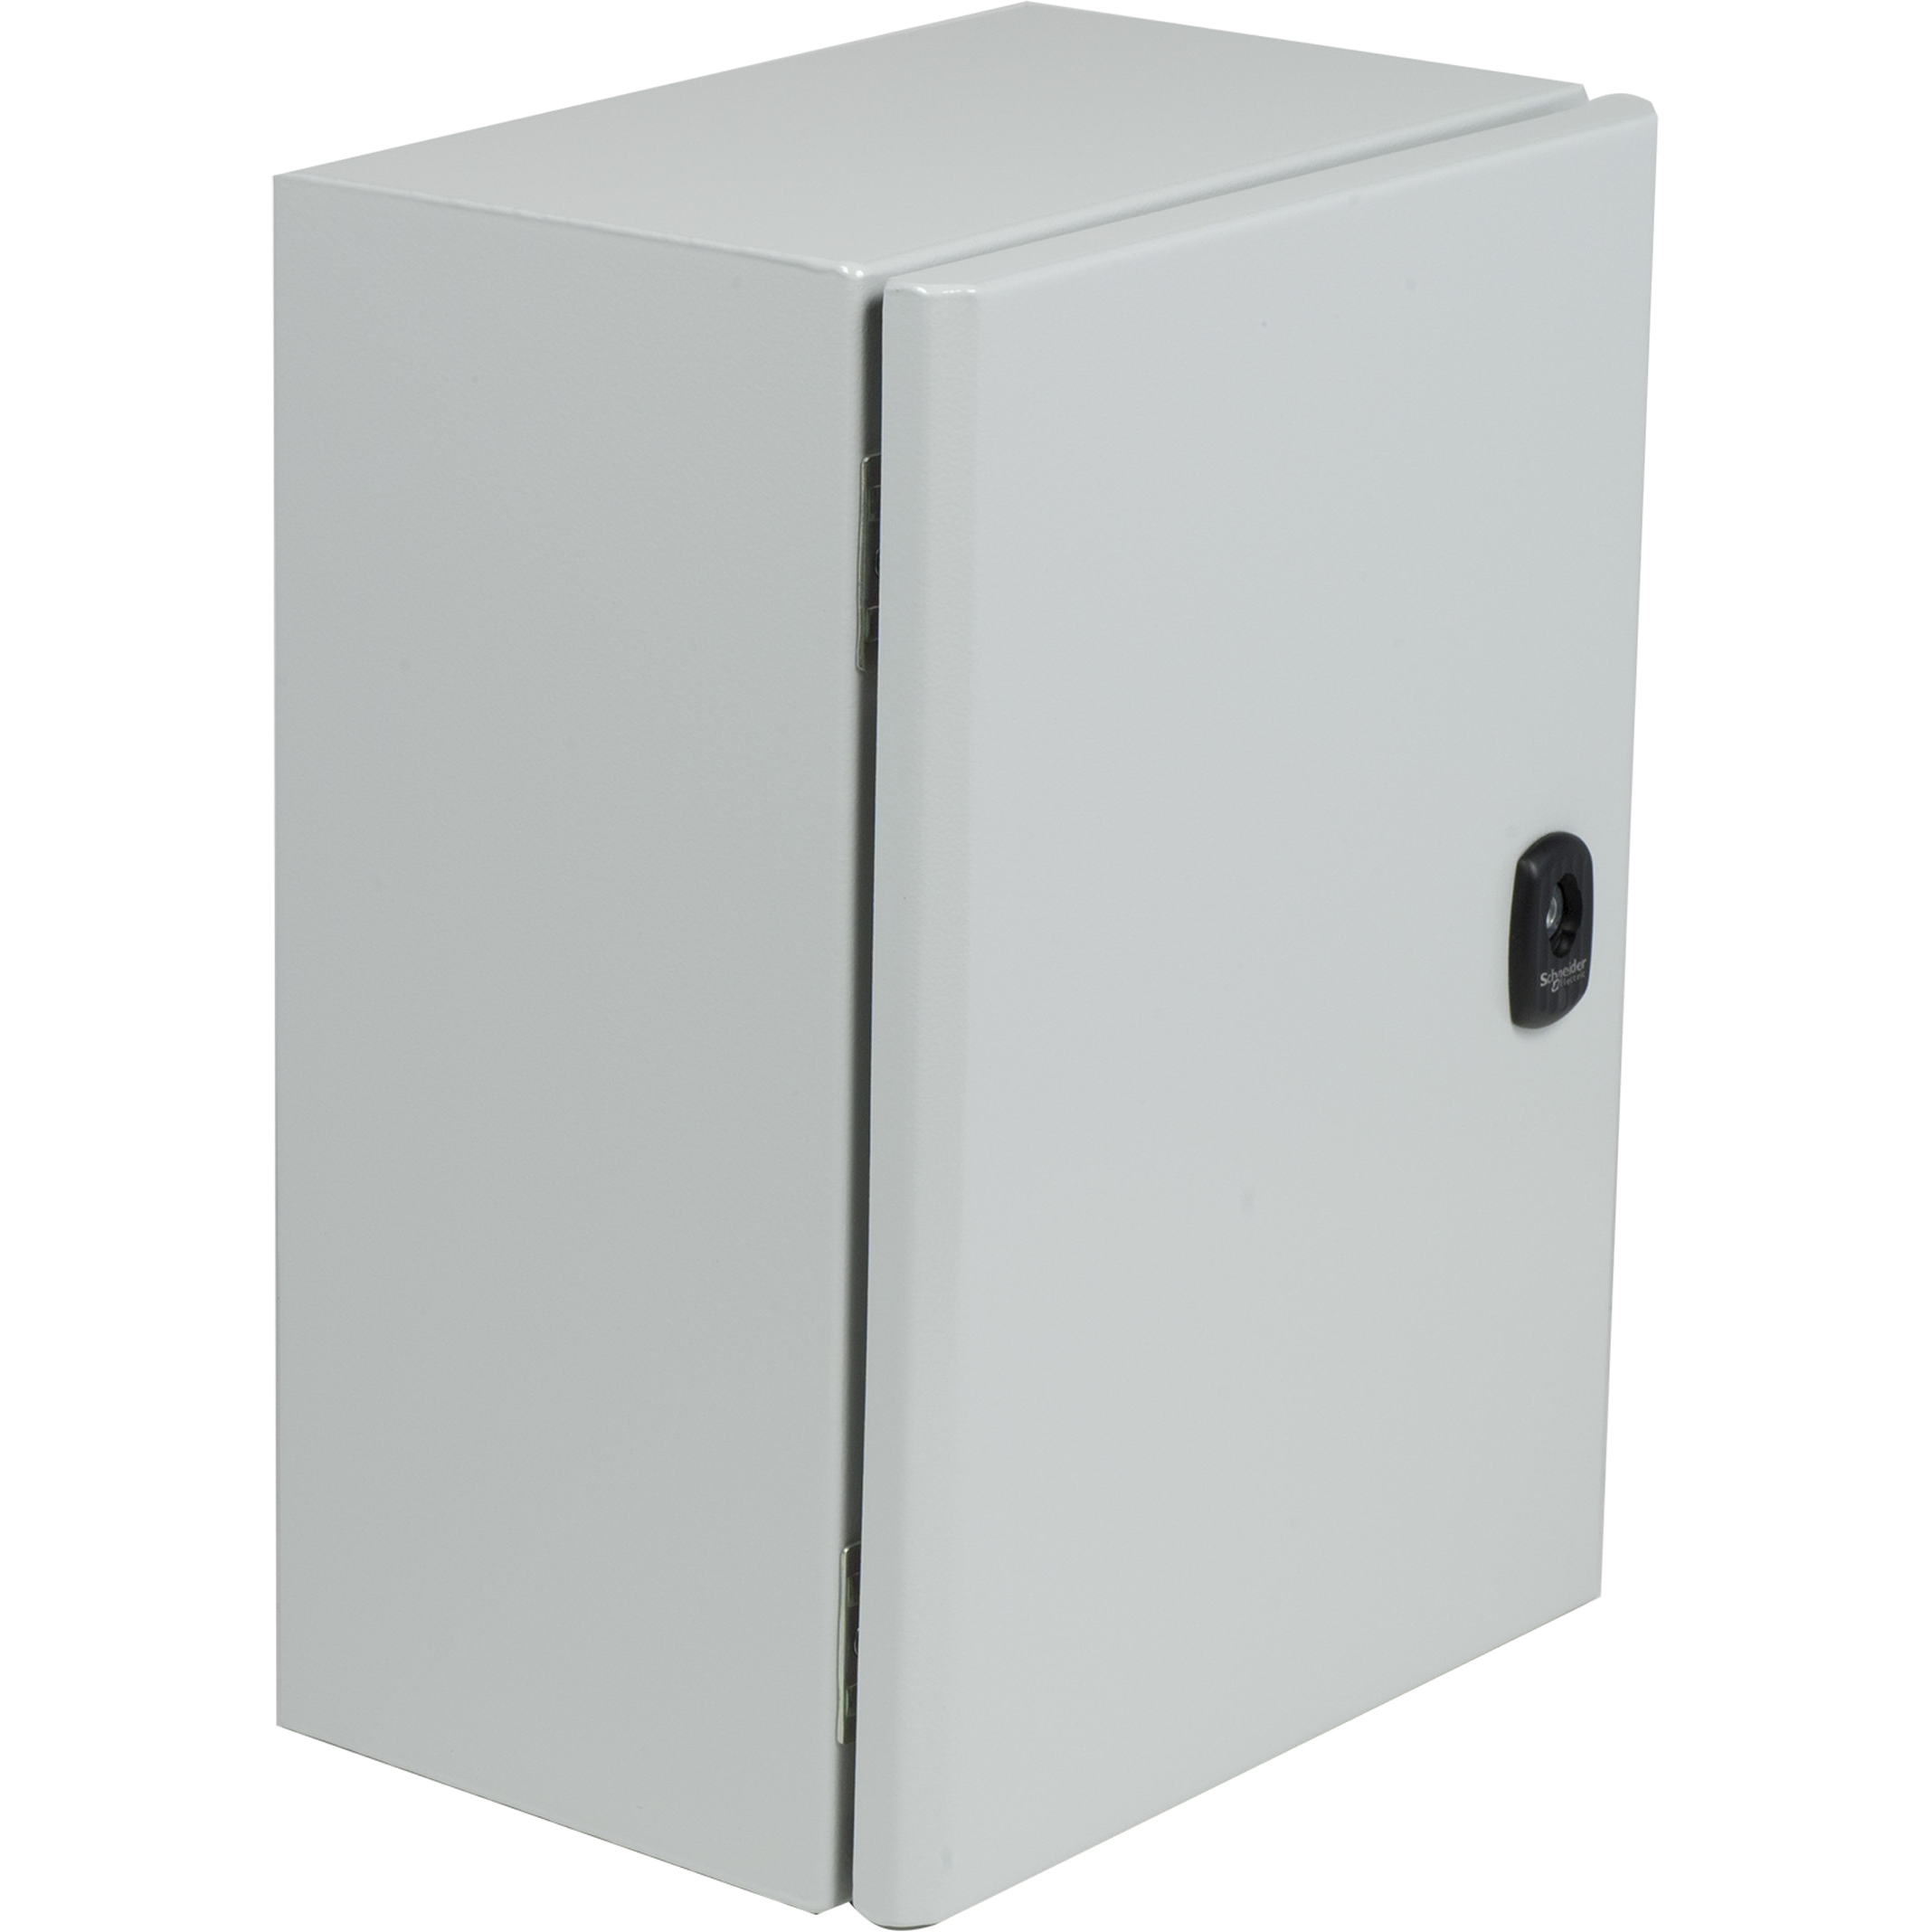 Wall mounted steel enclosure, Spacial S3DC, plain door, without plain chasis, 300x200x150mm, IP66, IK10